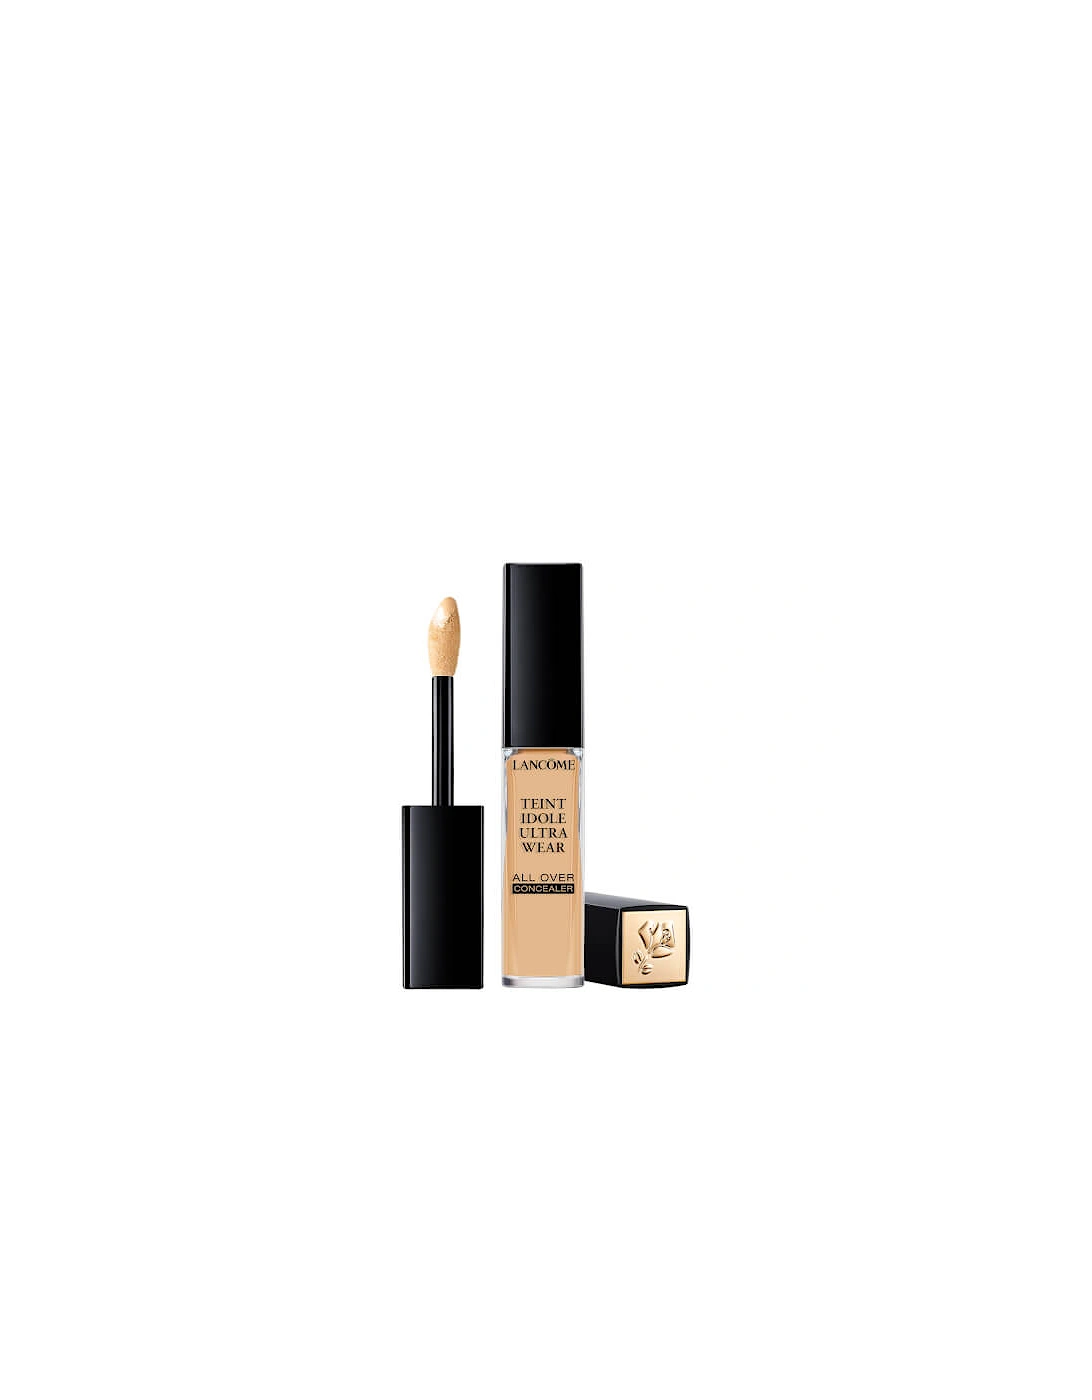 Teint Idole Ultra Wear All Over Concealer - 320 Bisque W 035, 2 of 1